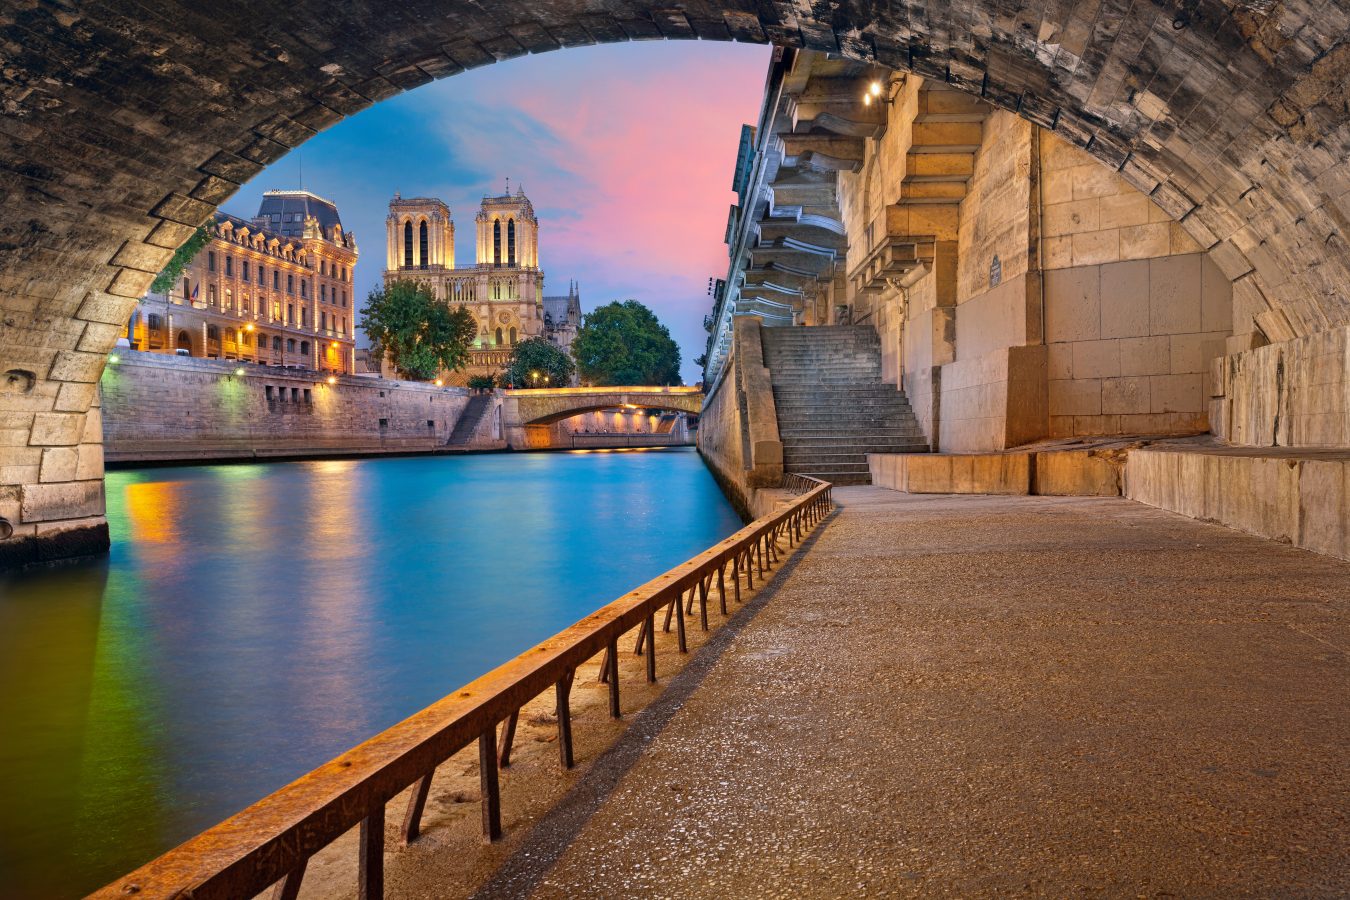 Under a bridge along the Seine River in Paris, France with a new of the Notre Dame in the distance.